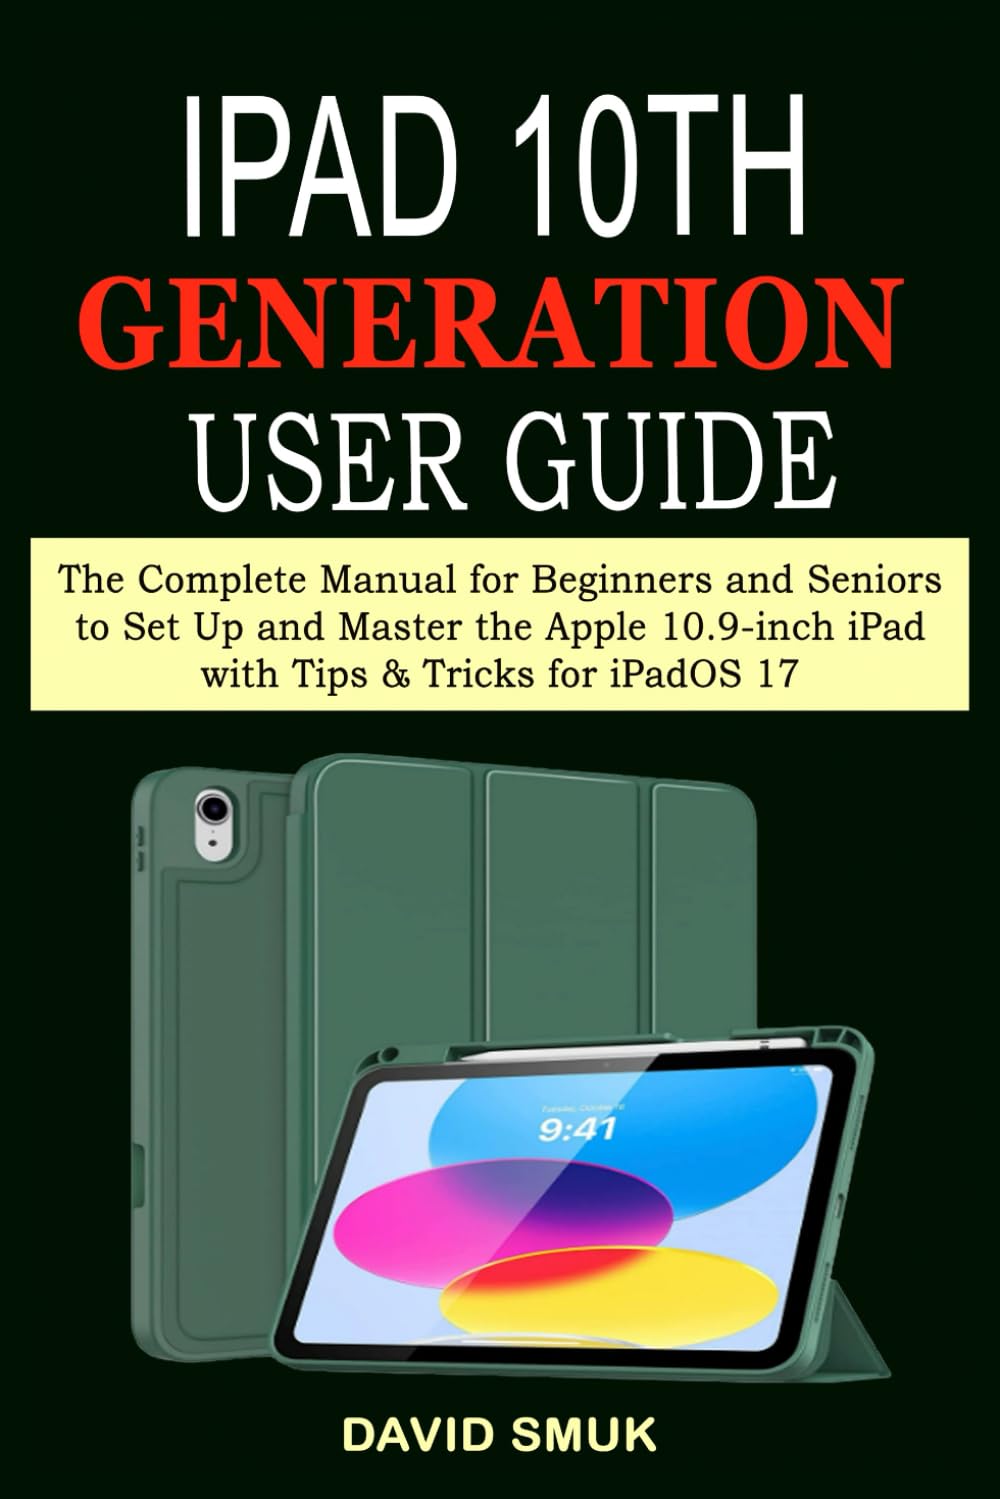 iPad 10th GENERATION User Guide: The Complete Manual for Beginners and Seniors to Set Up and Master the Apple 10.9-inch iPad with Tips & Tricks for iPadOS 17